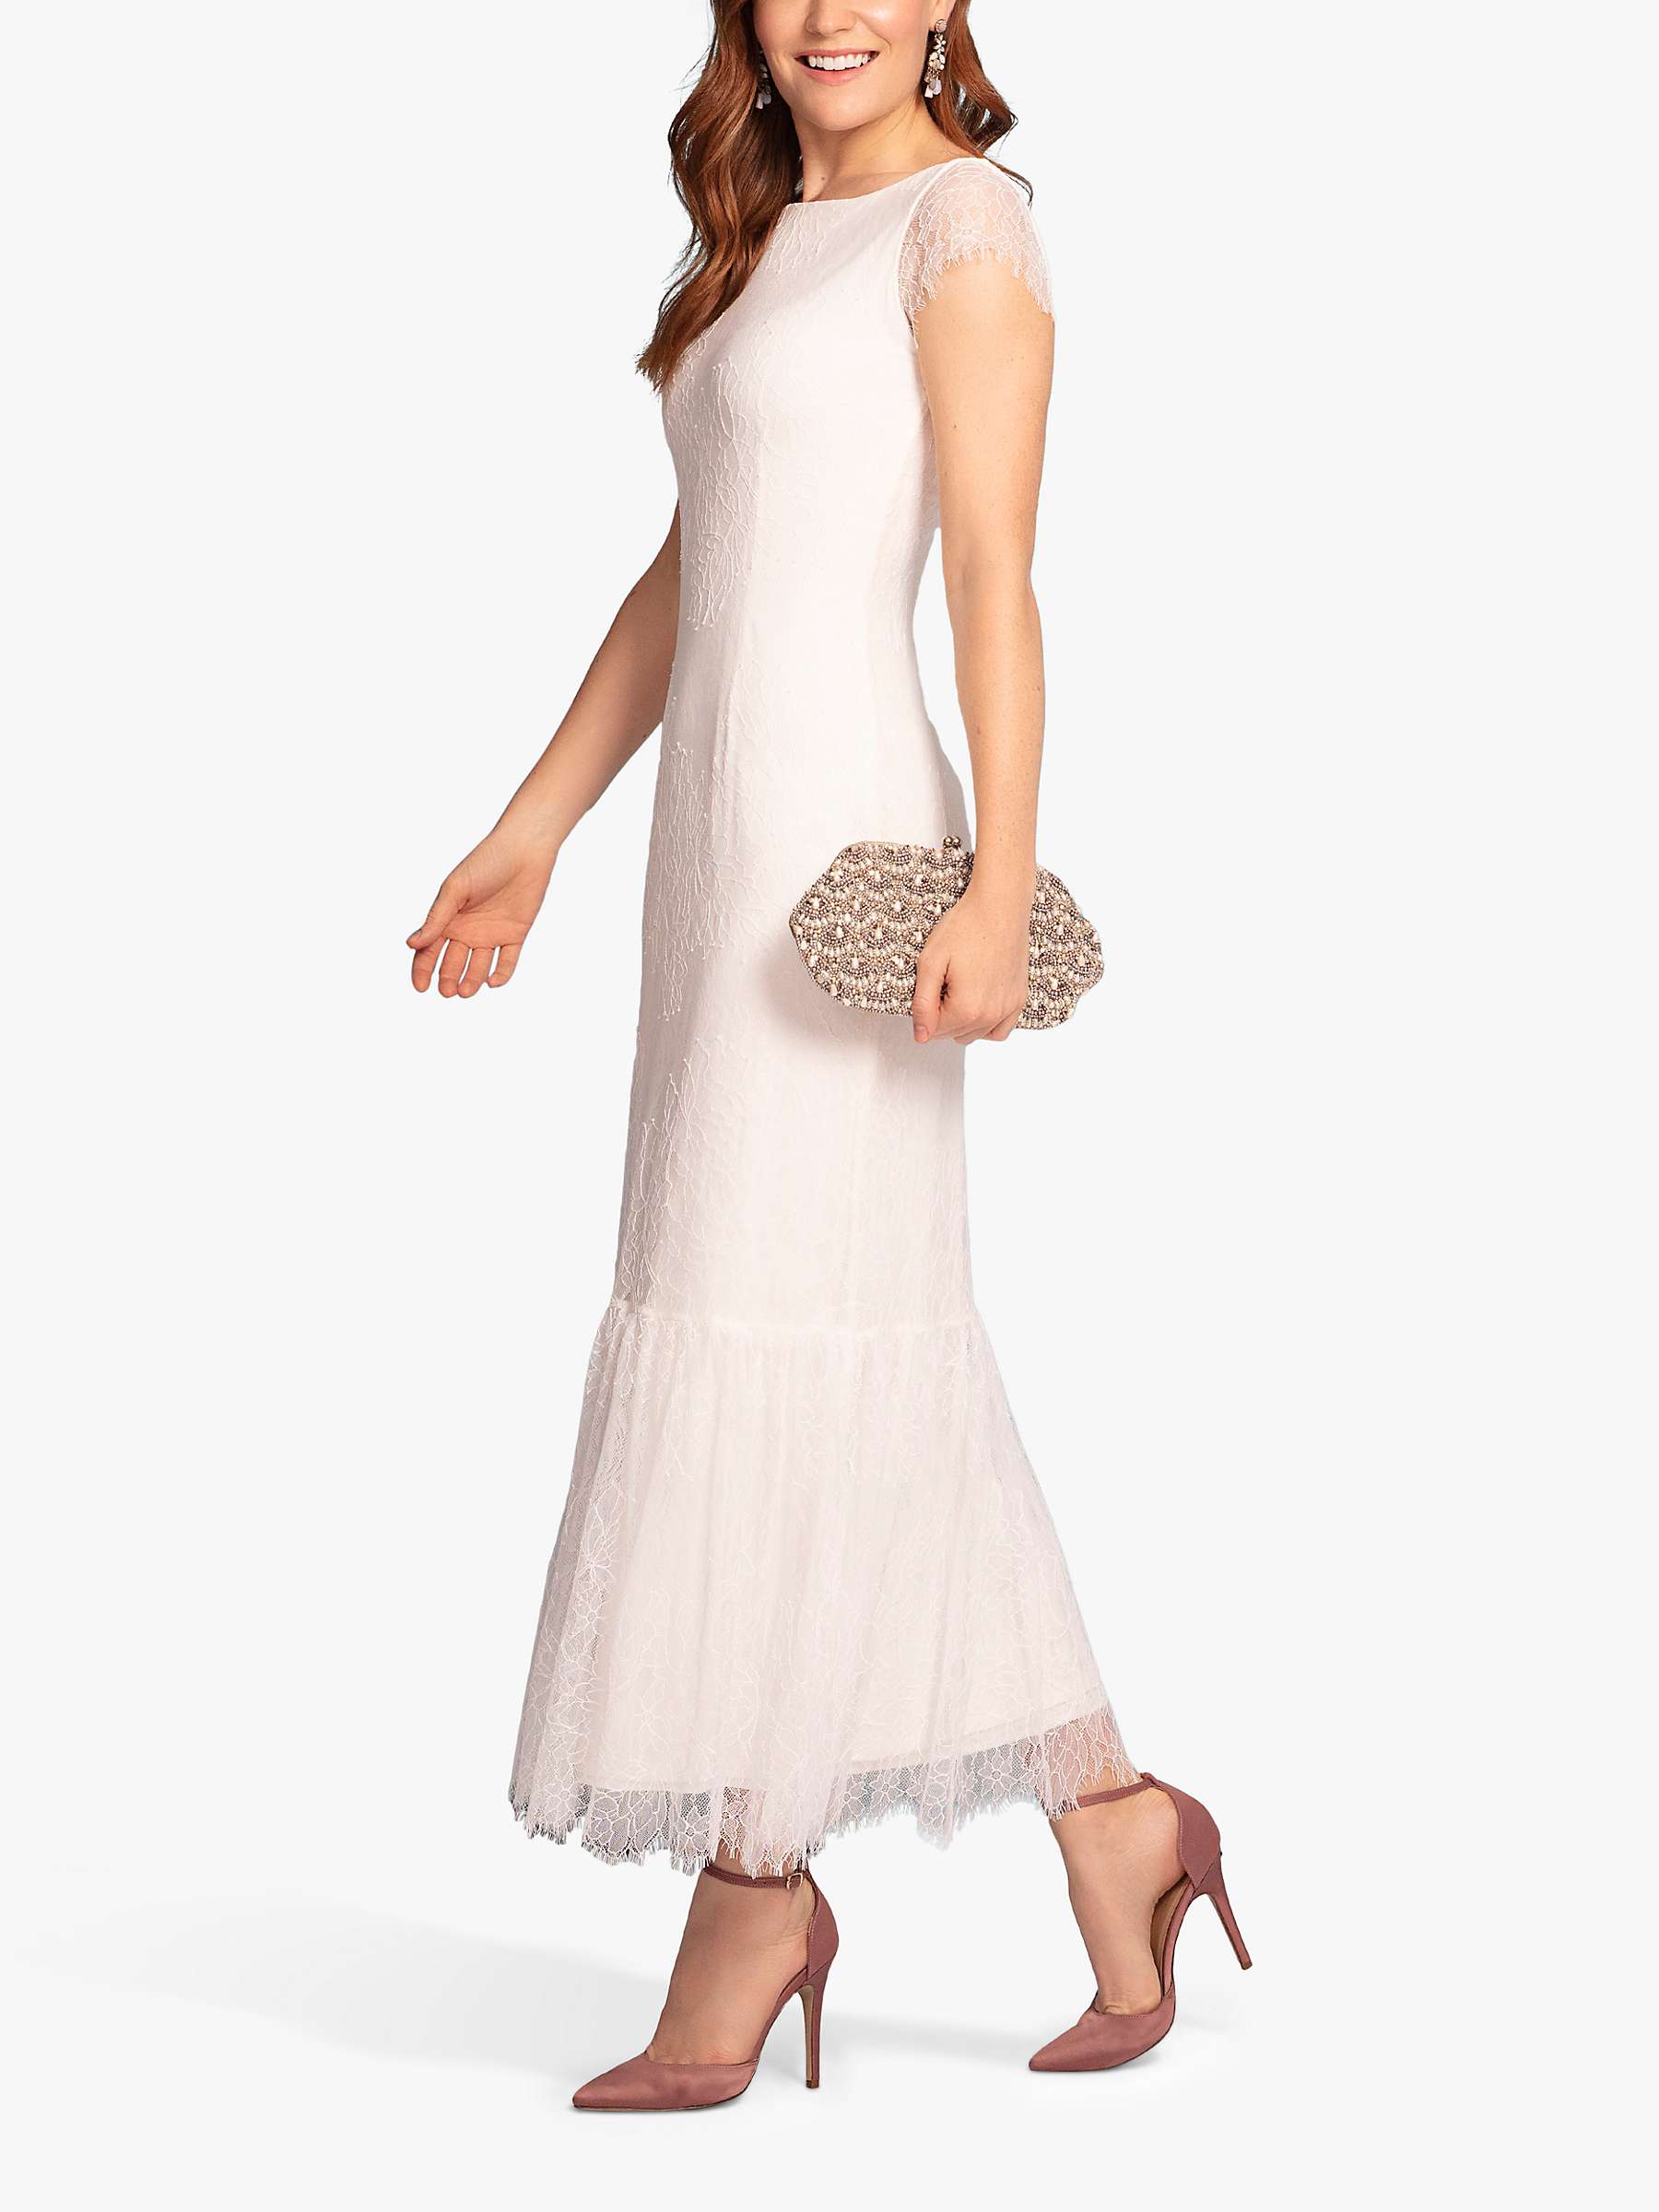 Buy Alie Street Beatrice Lace Dress, Ivory White Online at johnlewis.com